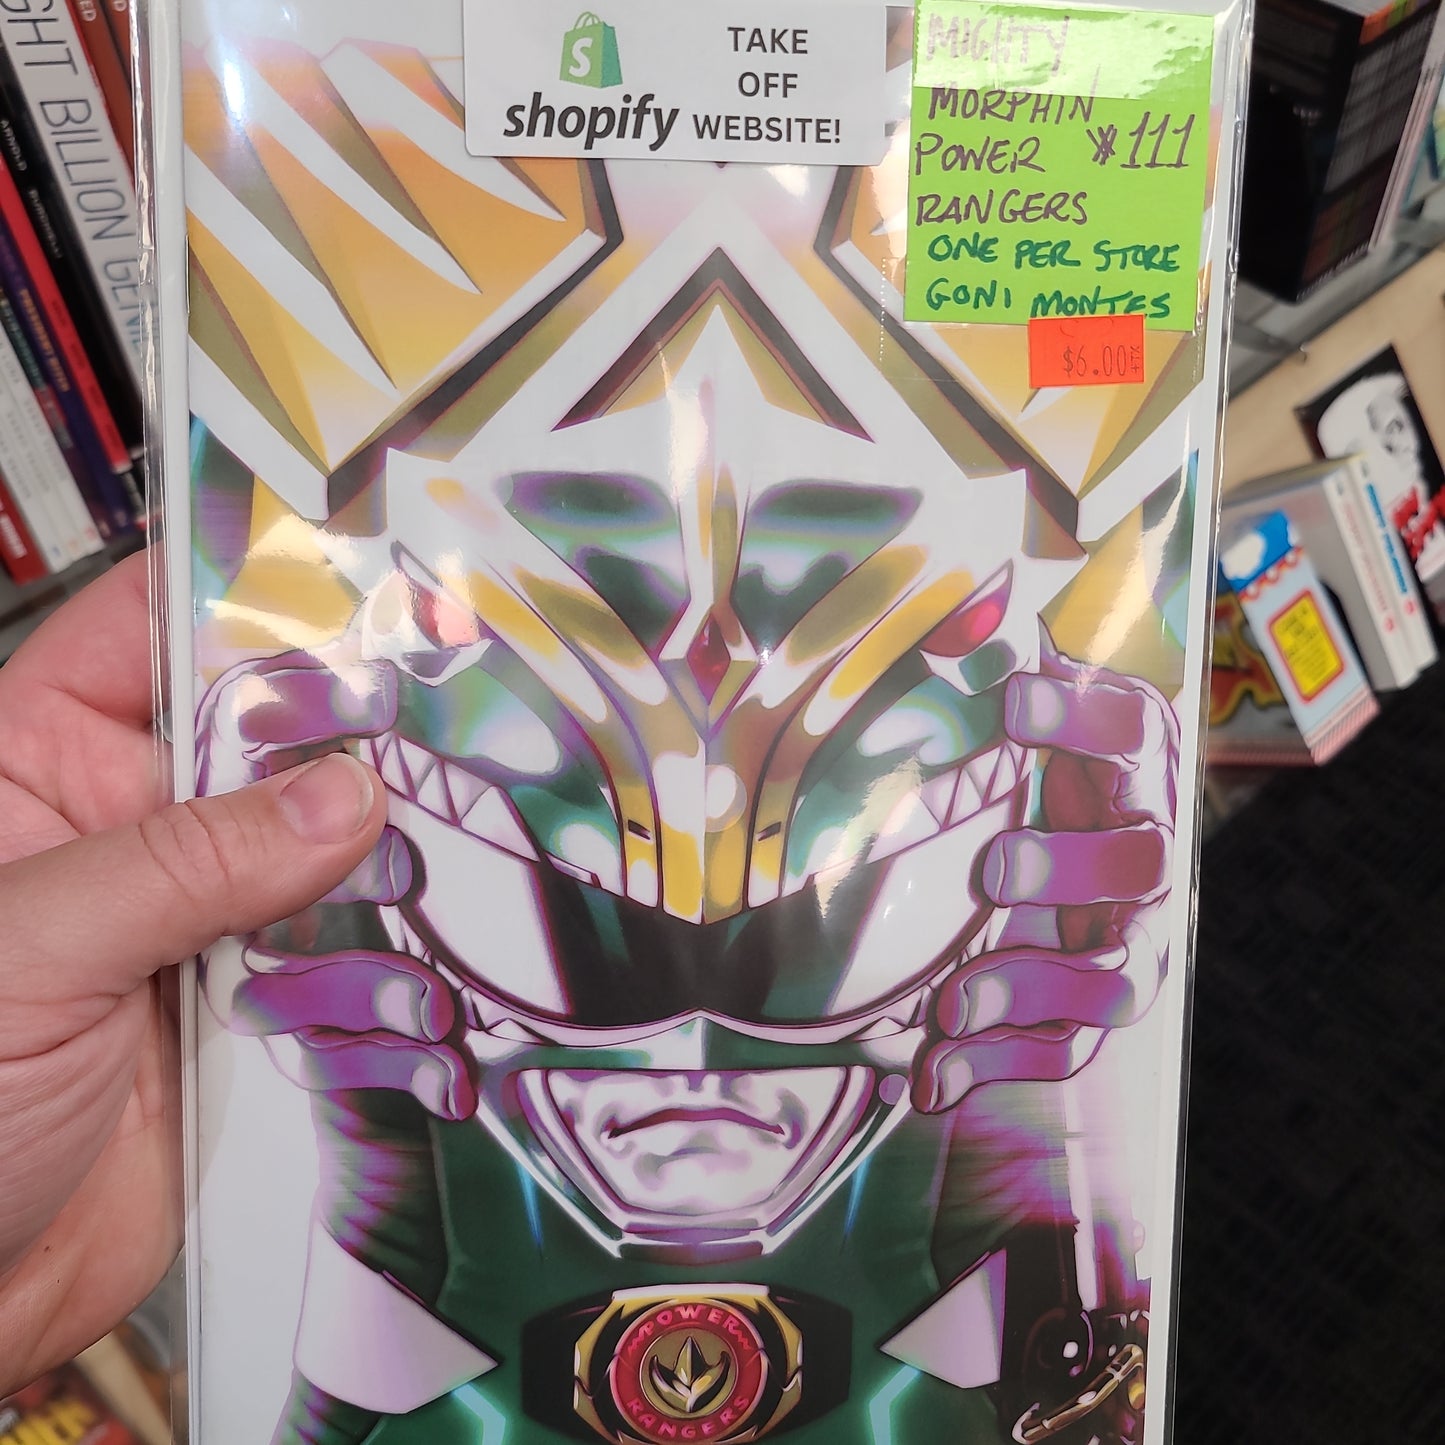 MIGHTY MORPHIN POWER RANGERS #111 ONE PER STORE UNLOCKABLE BY GONI MONTES